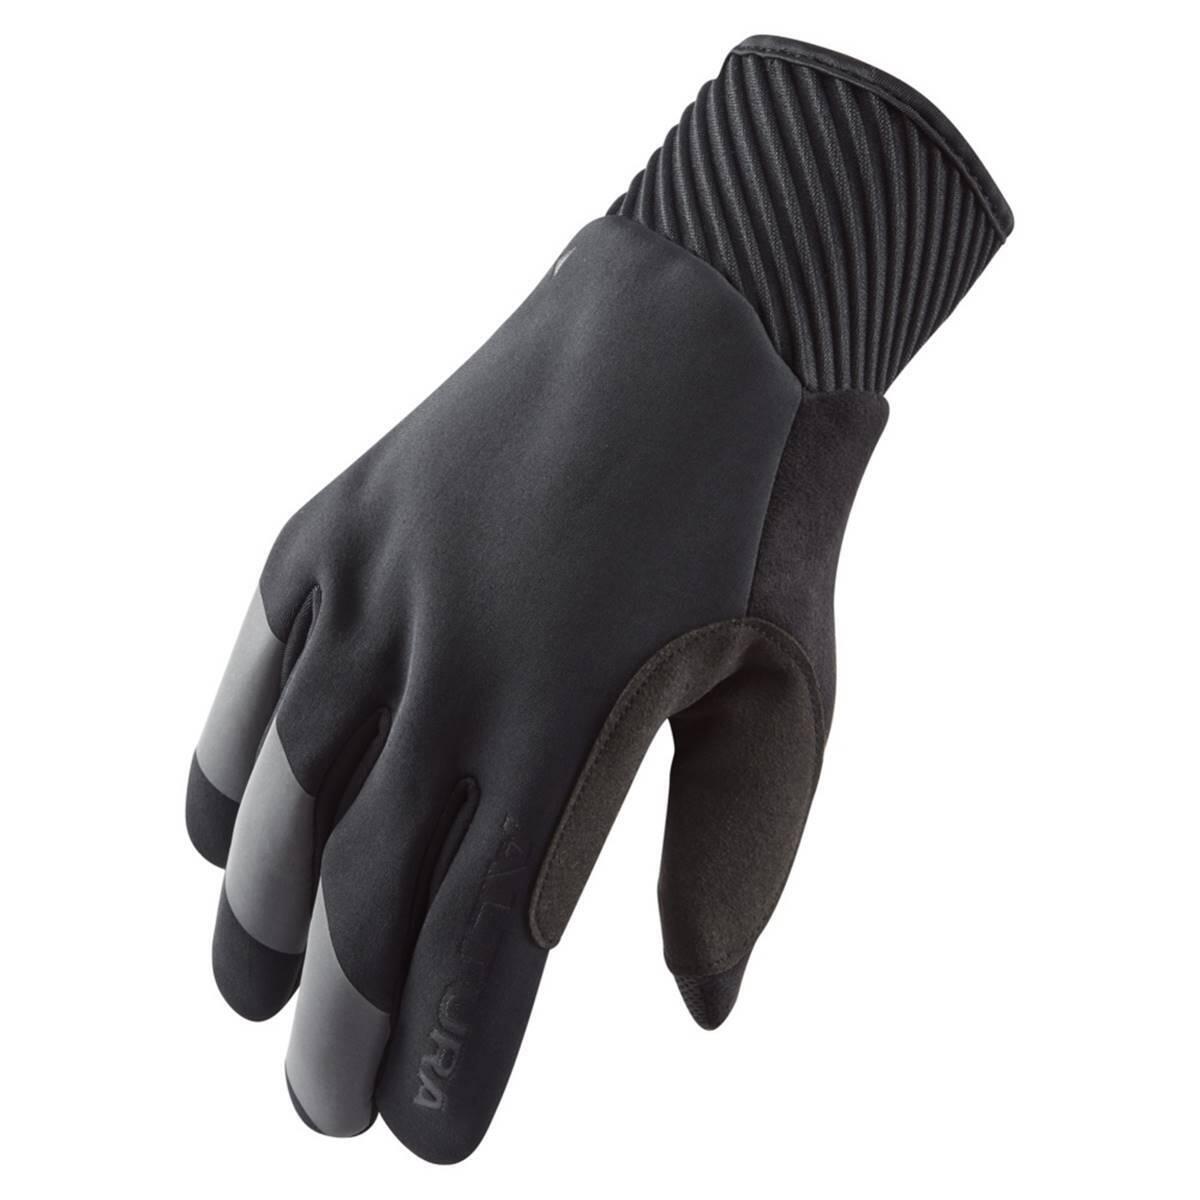 Nightvision Unisex Waterproof Insulated Cycling Gloves 6/6